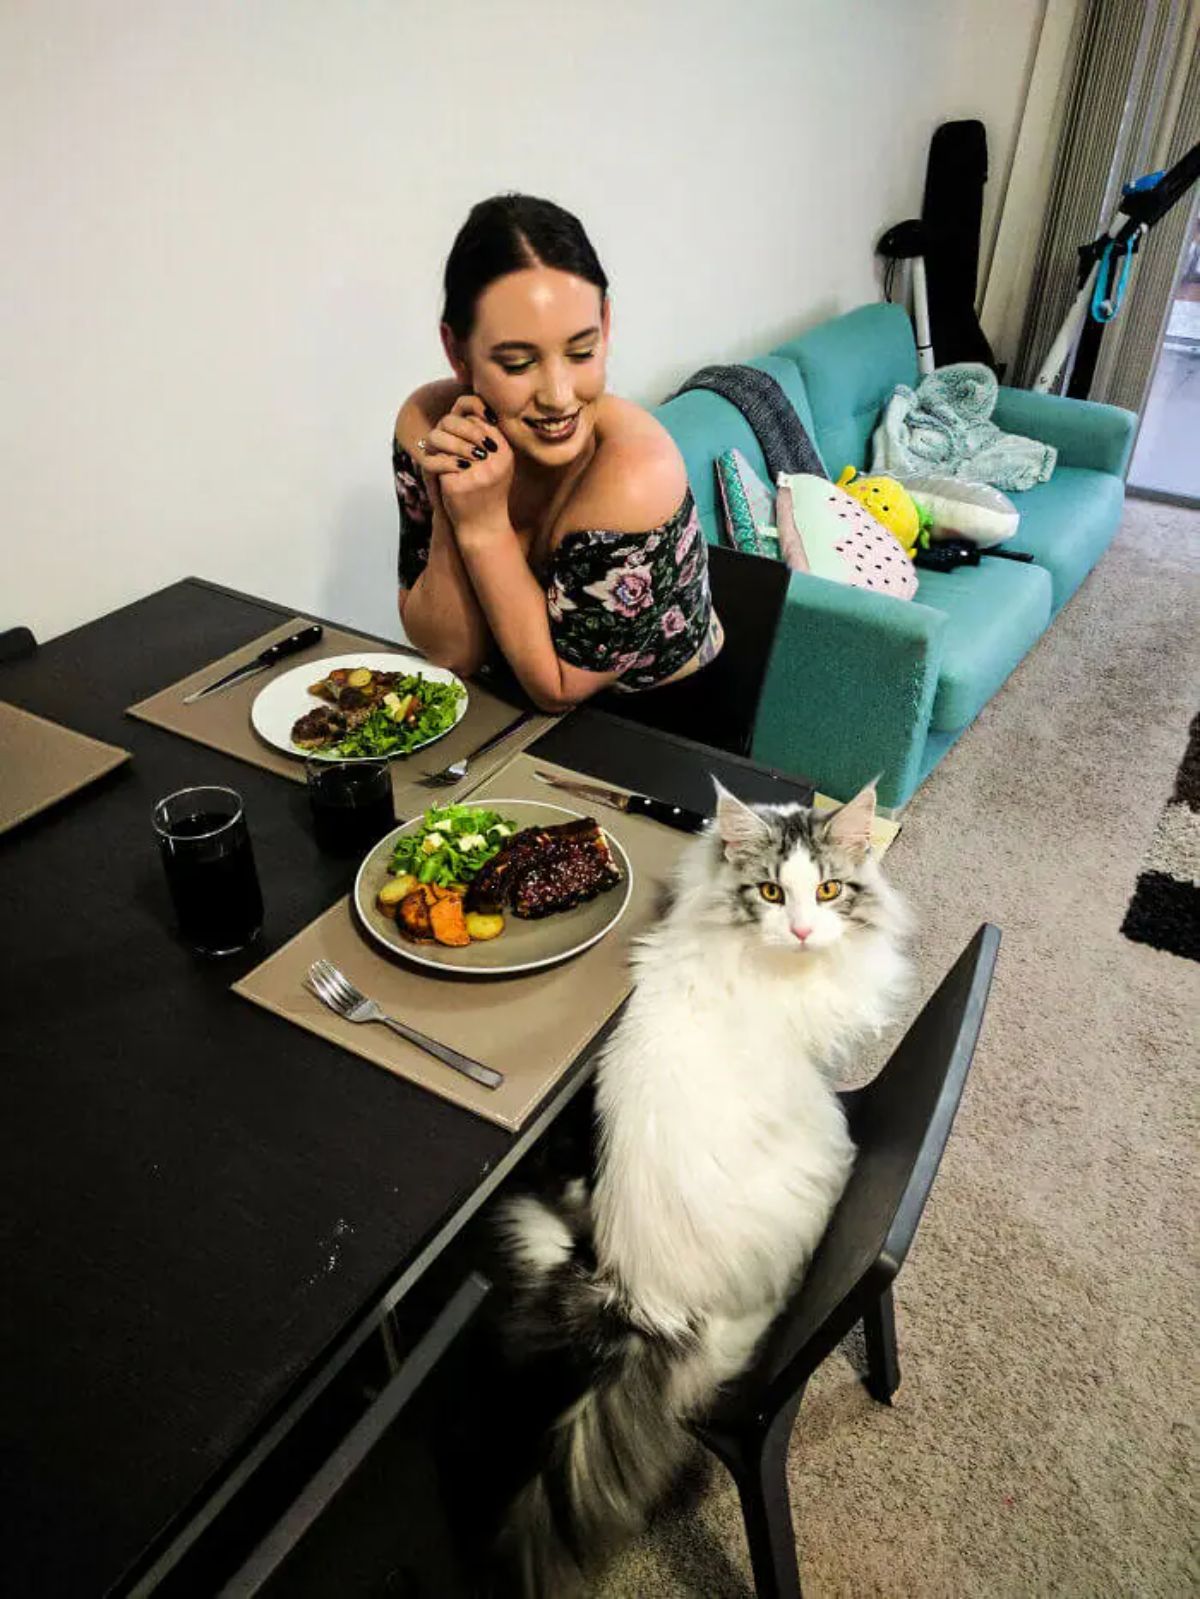 grey and white fluffy cat sitting on a chair at a dining table in front of food next to a woman